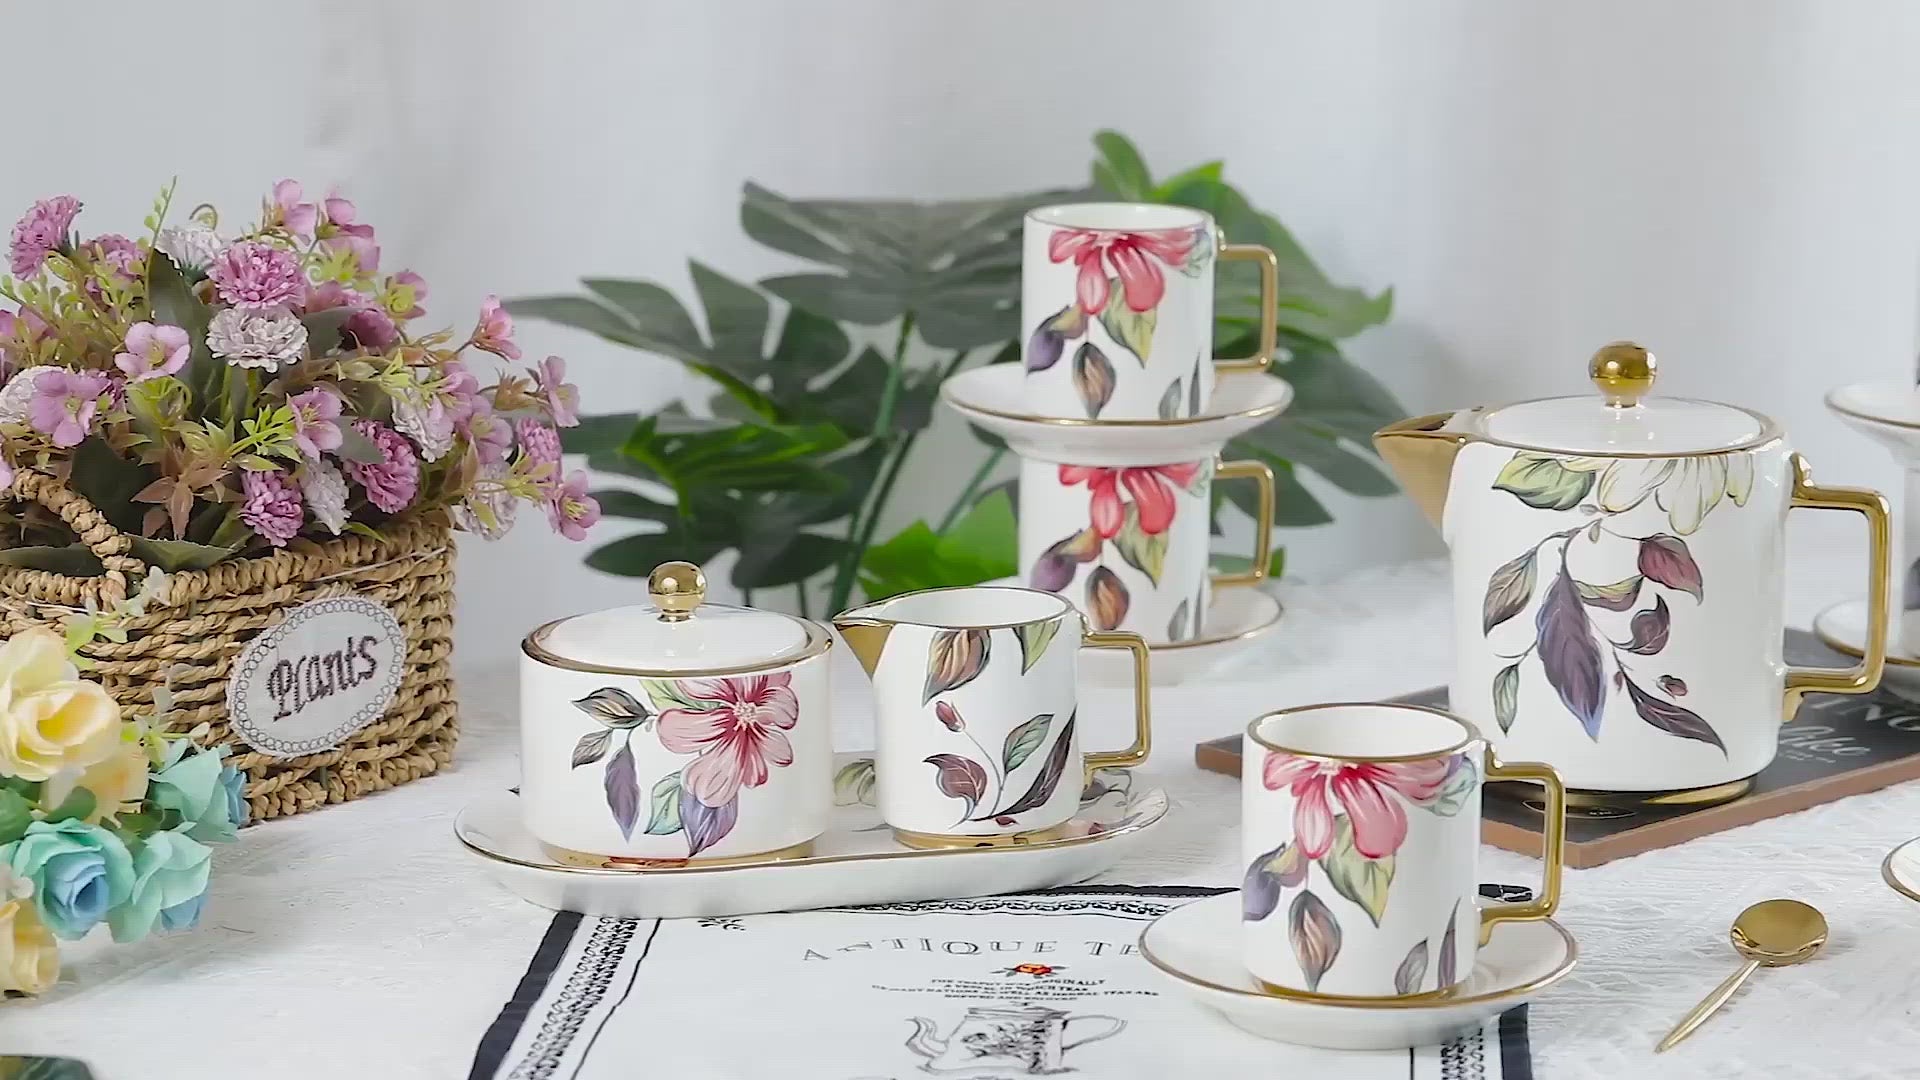 Porcelain Floral Tea Set with Teapot, Cups and saucers, Sugar Bowl and Pitcher 16 Pieces